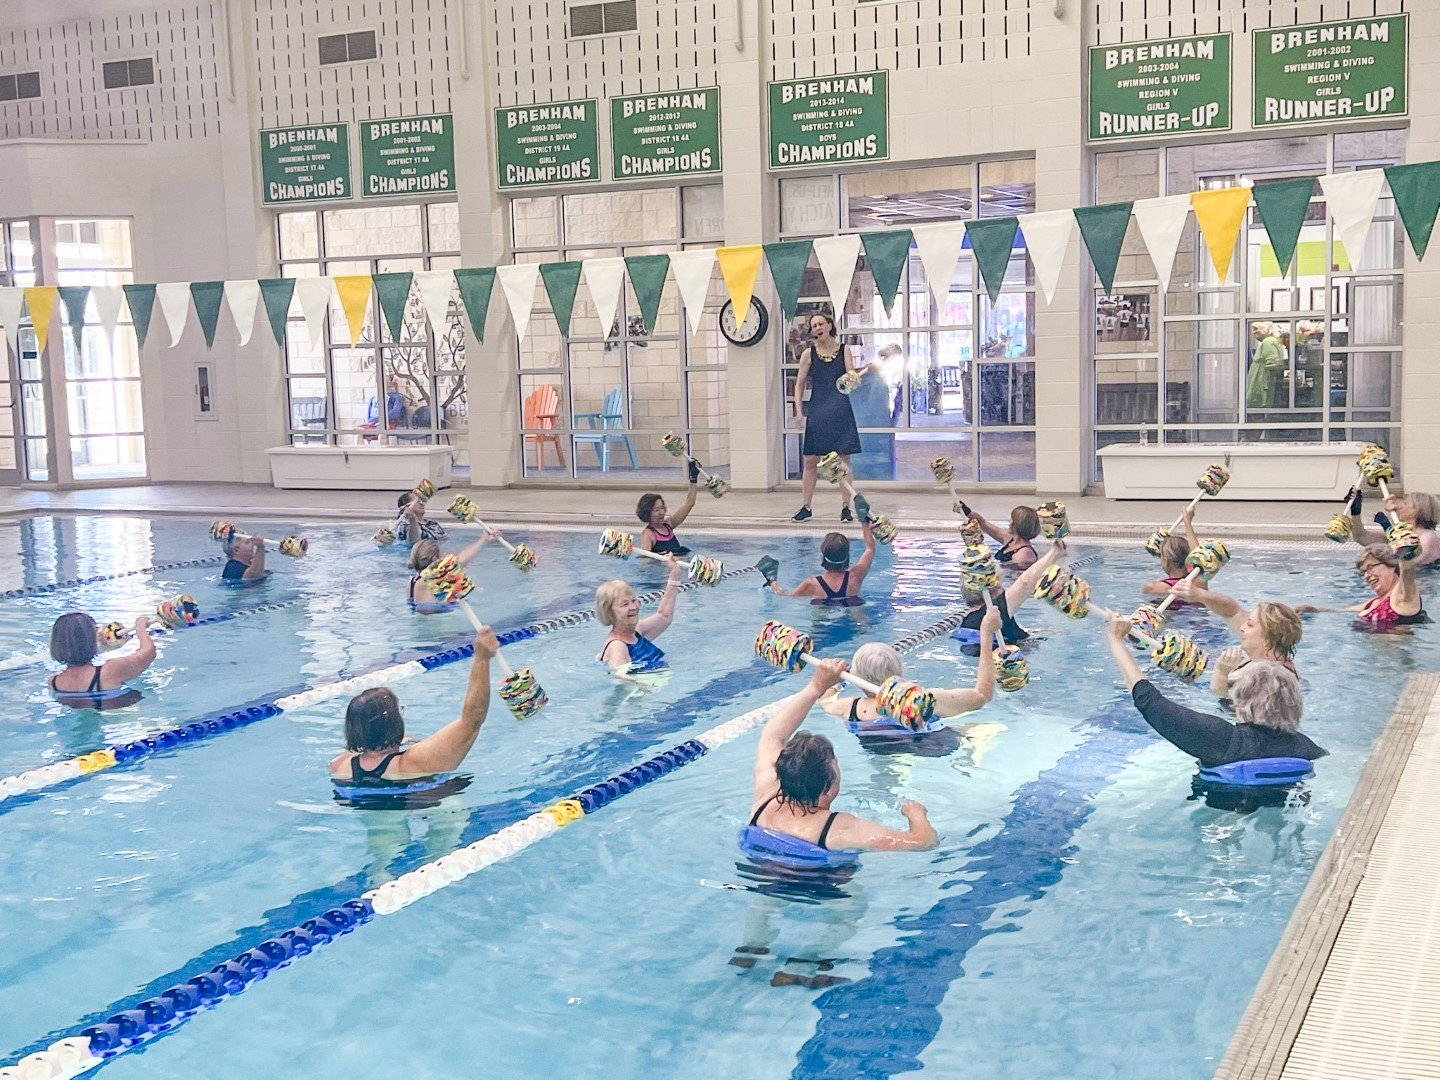 Aqua Cardio Class - a group of people lifting water weights in a large pool while listening to an instructor standing on the deck